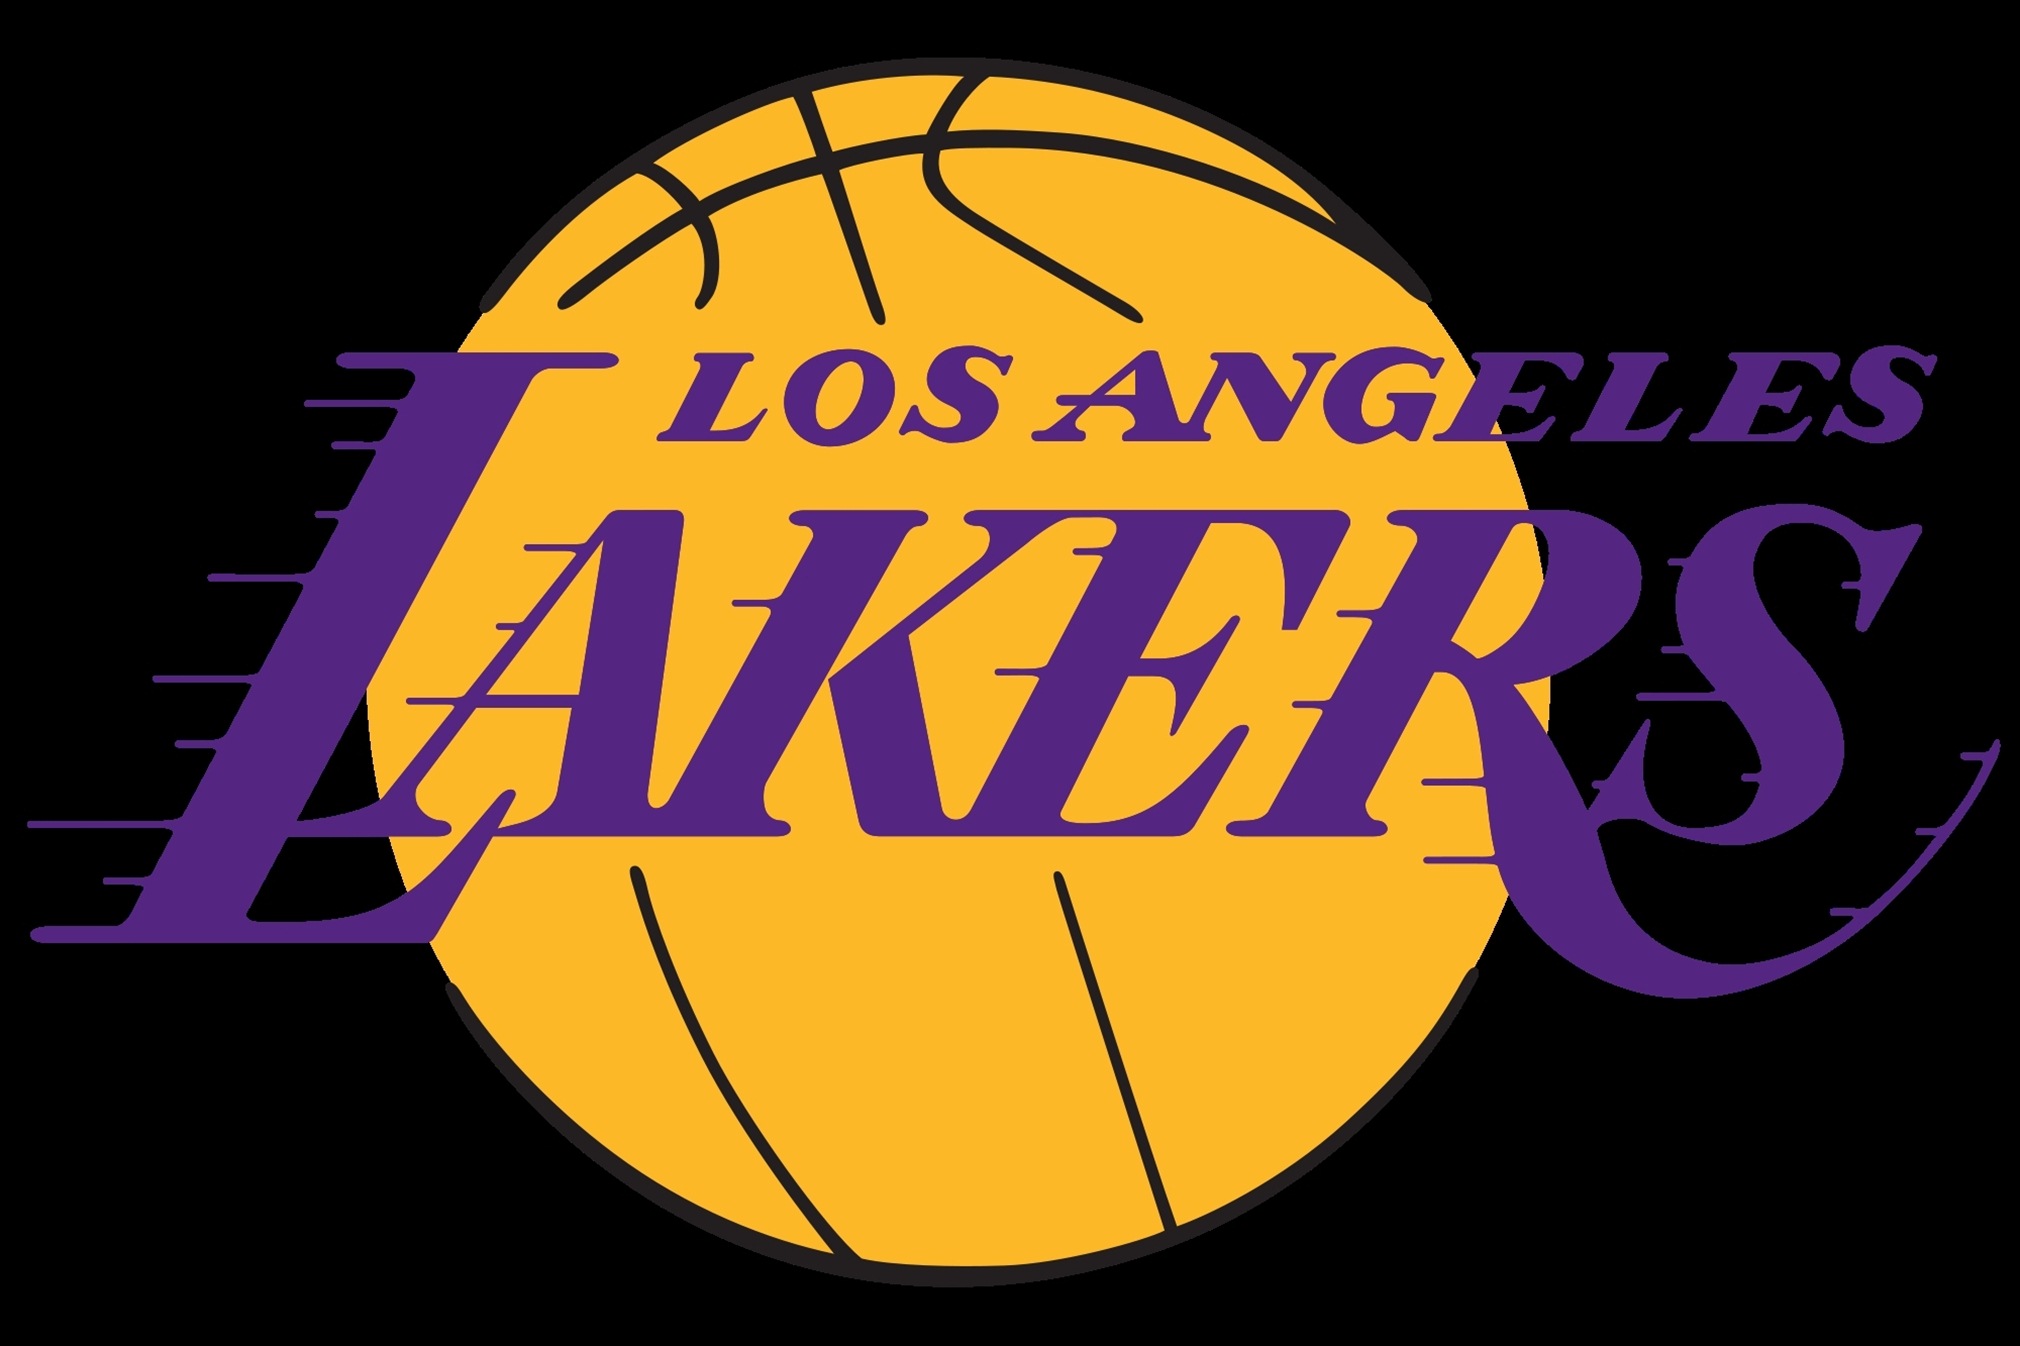 The official site of the los angeles lakers